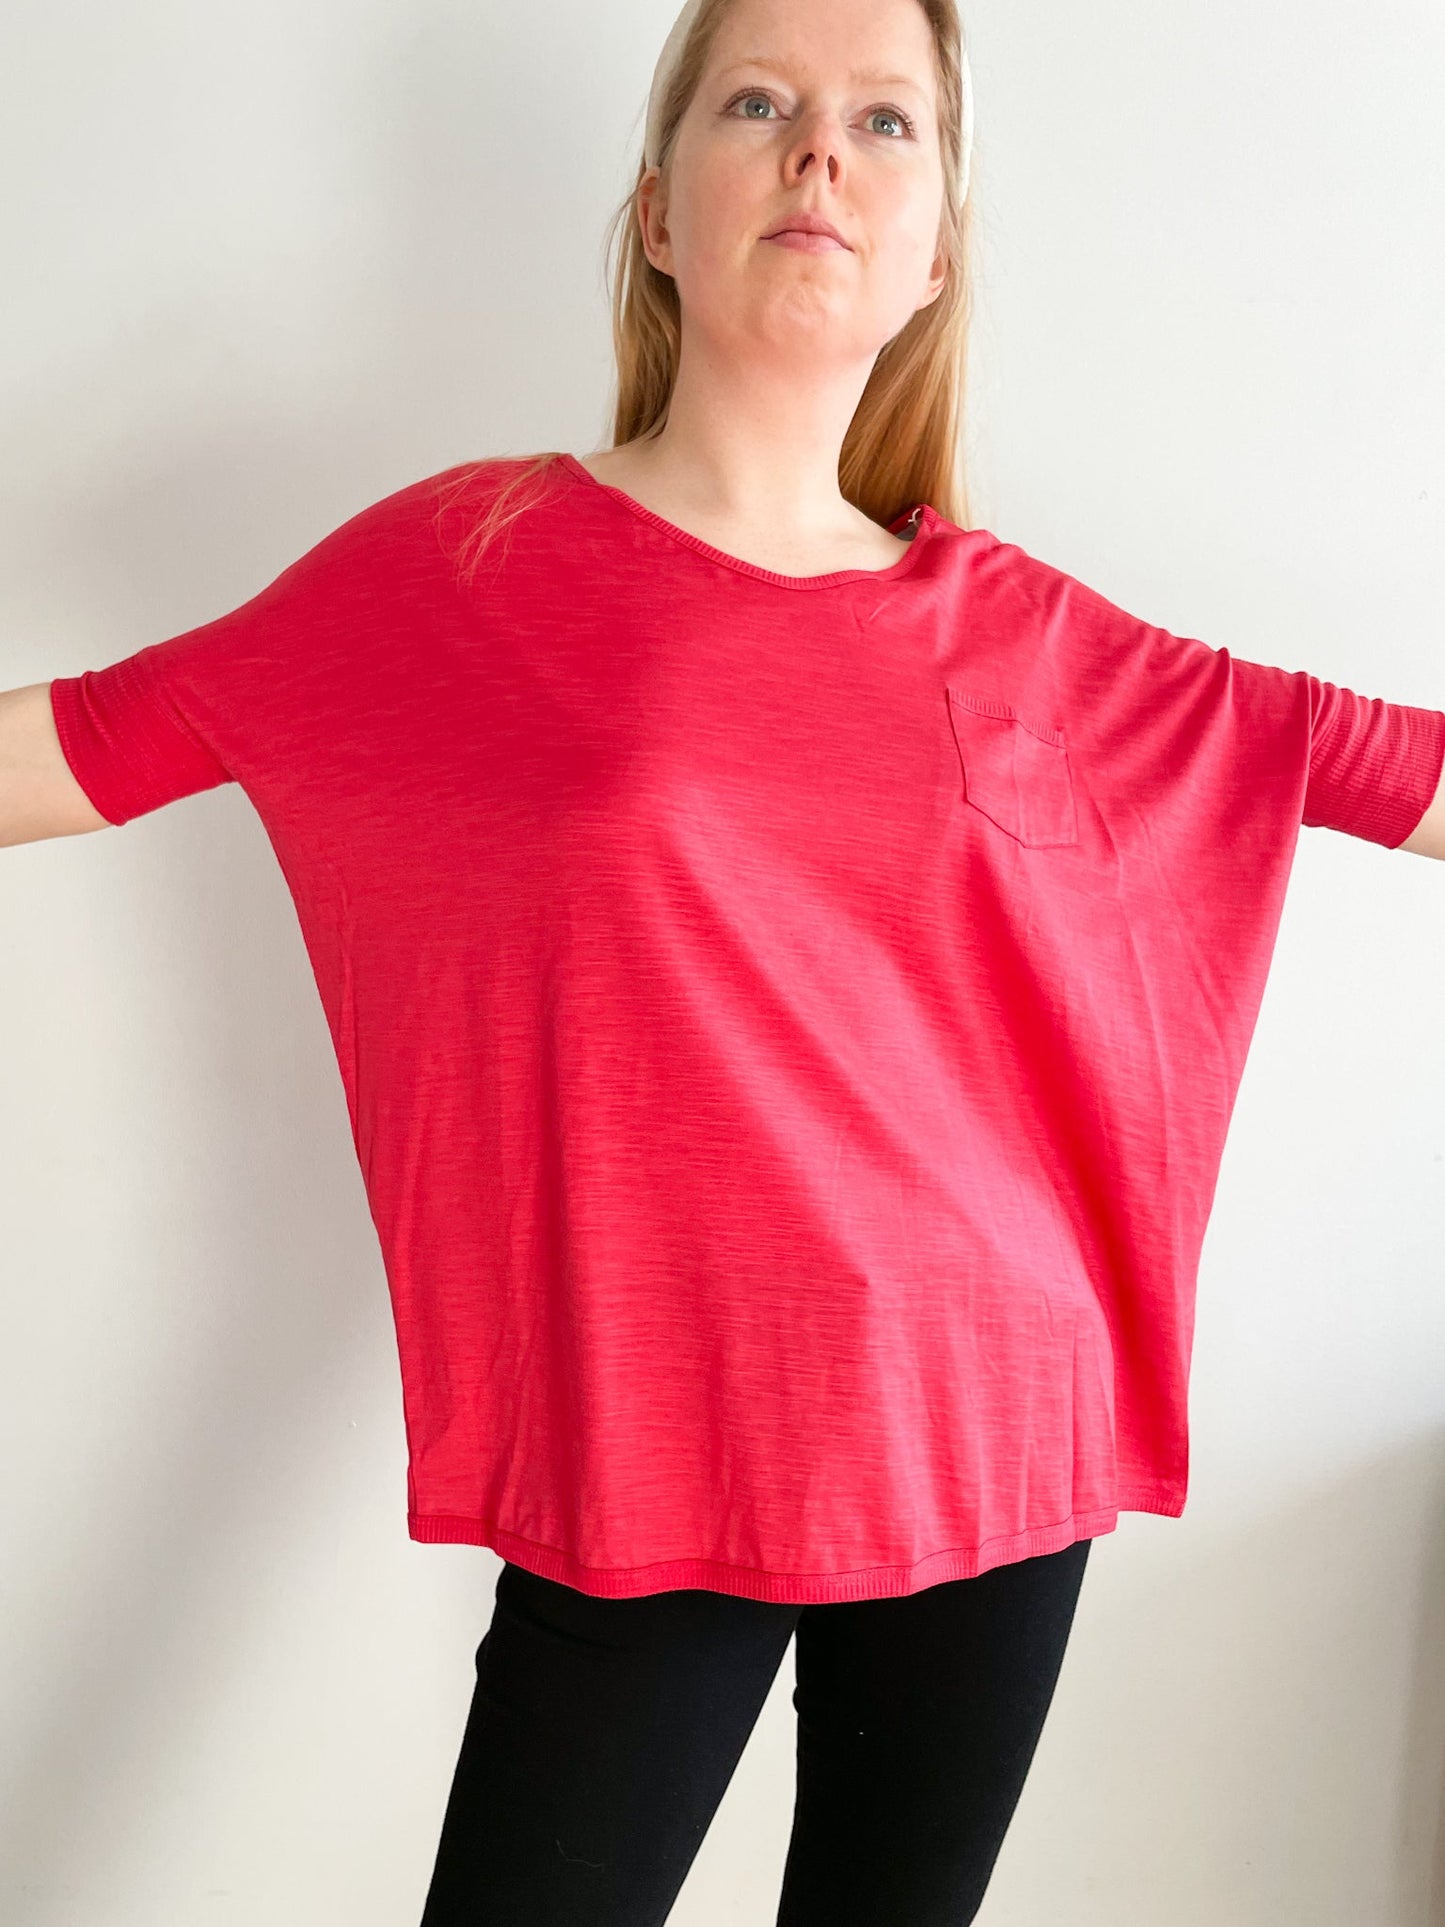 Fine Collection Raspberry Pink Silk Cotton Top NWT - M/L